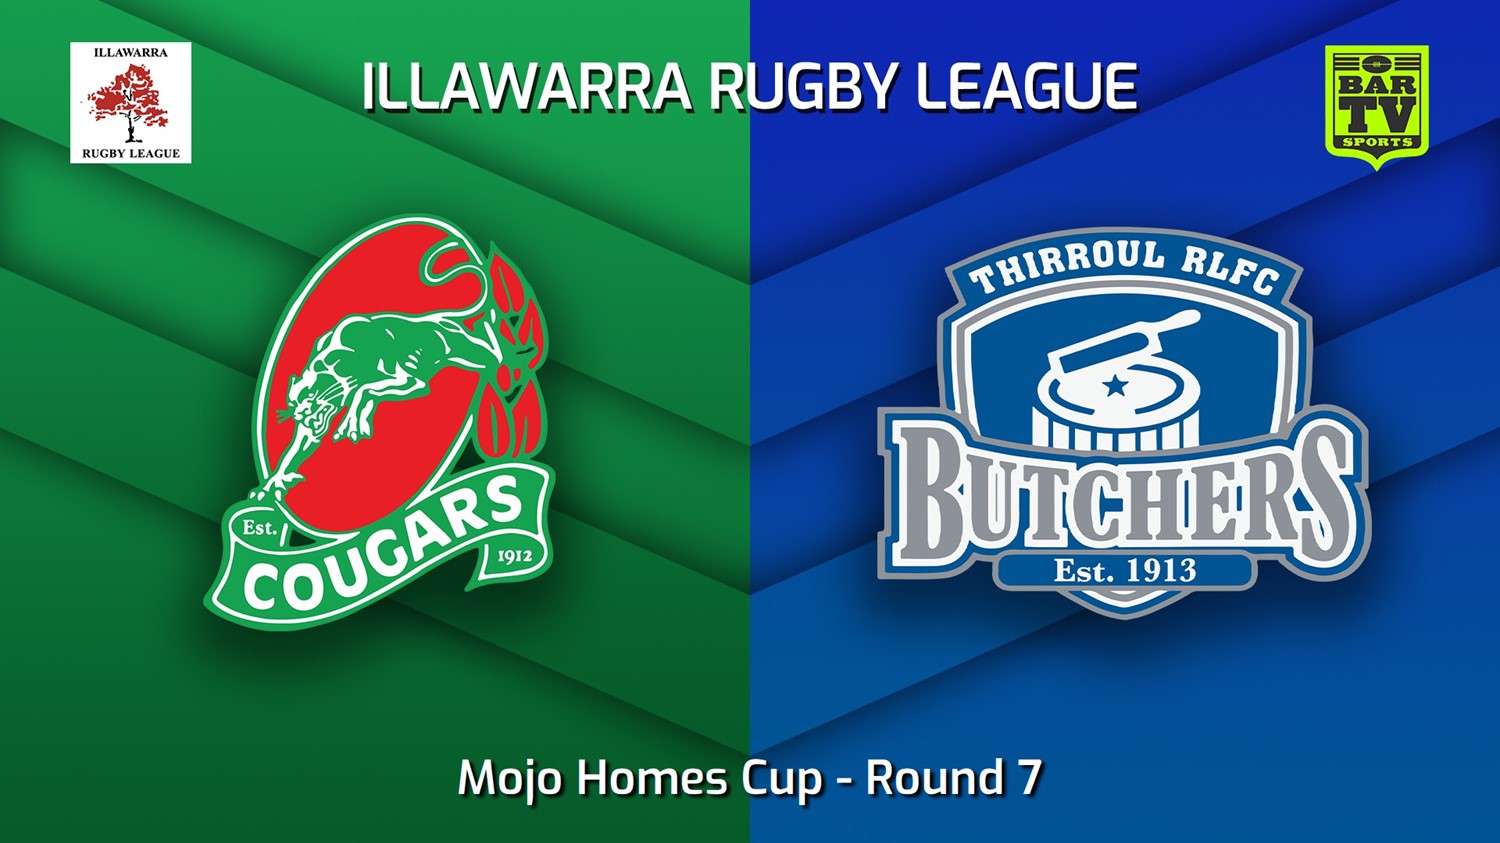 220619-Illawarra Round 7 - Mojo Homes Cup - Corrimal Cougars v Thirroul Butchers Slate Image